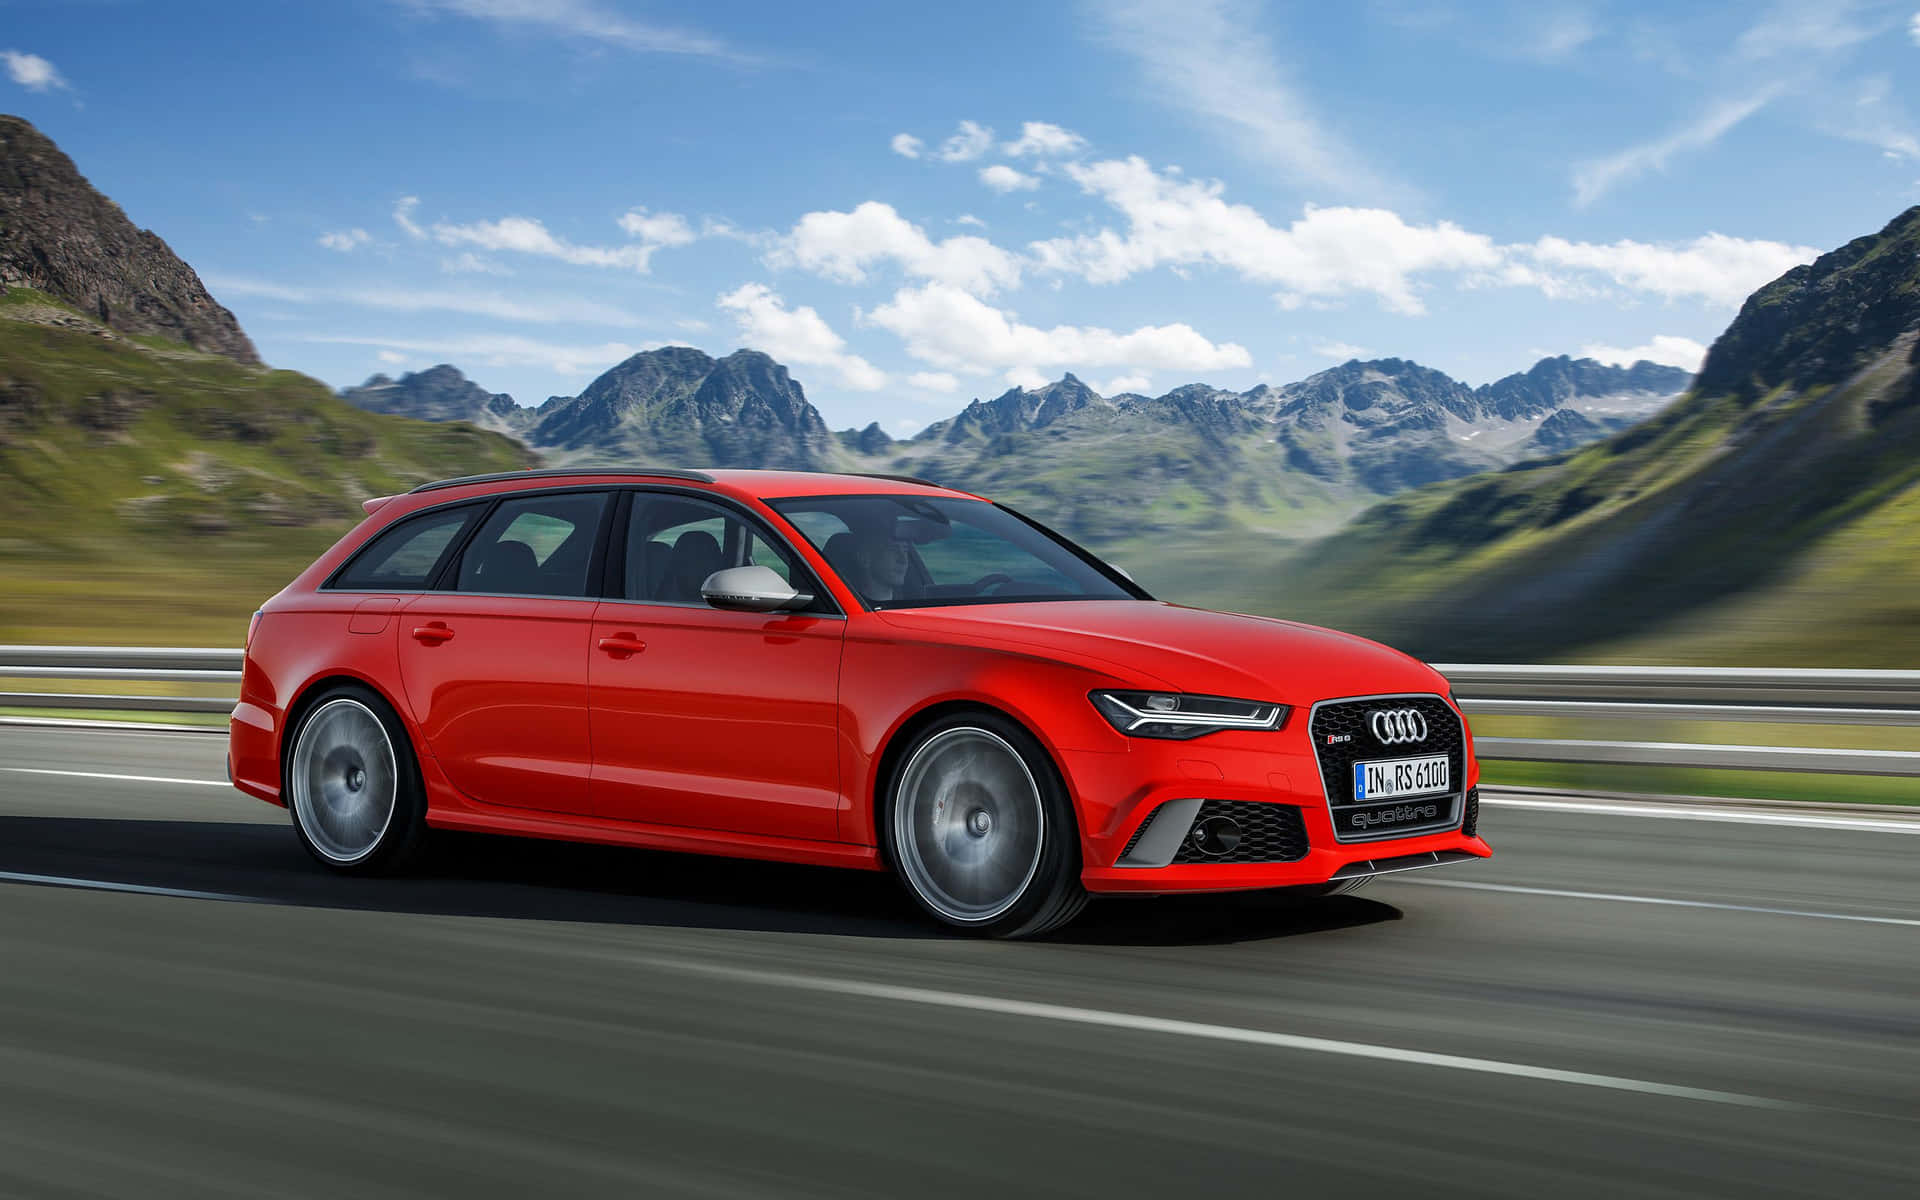 Caption: Stunning Audi RS6 in Action Wallpaper